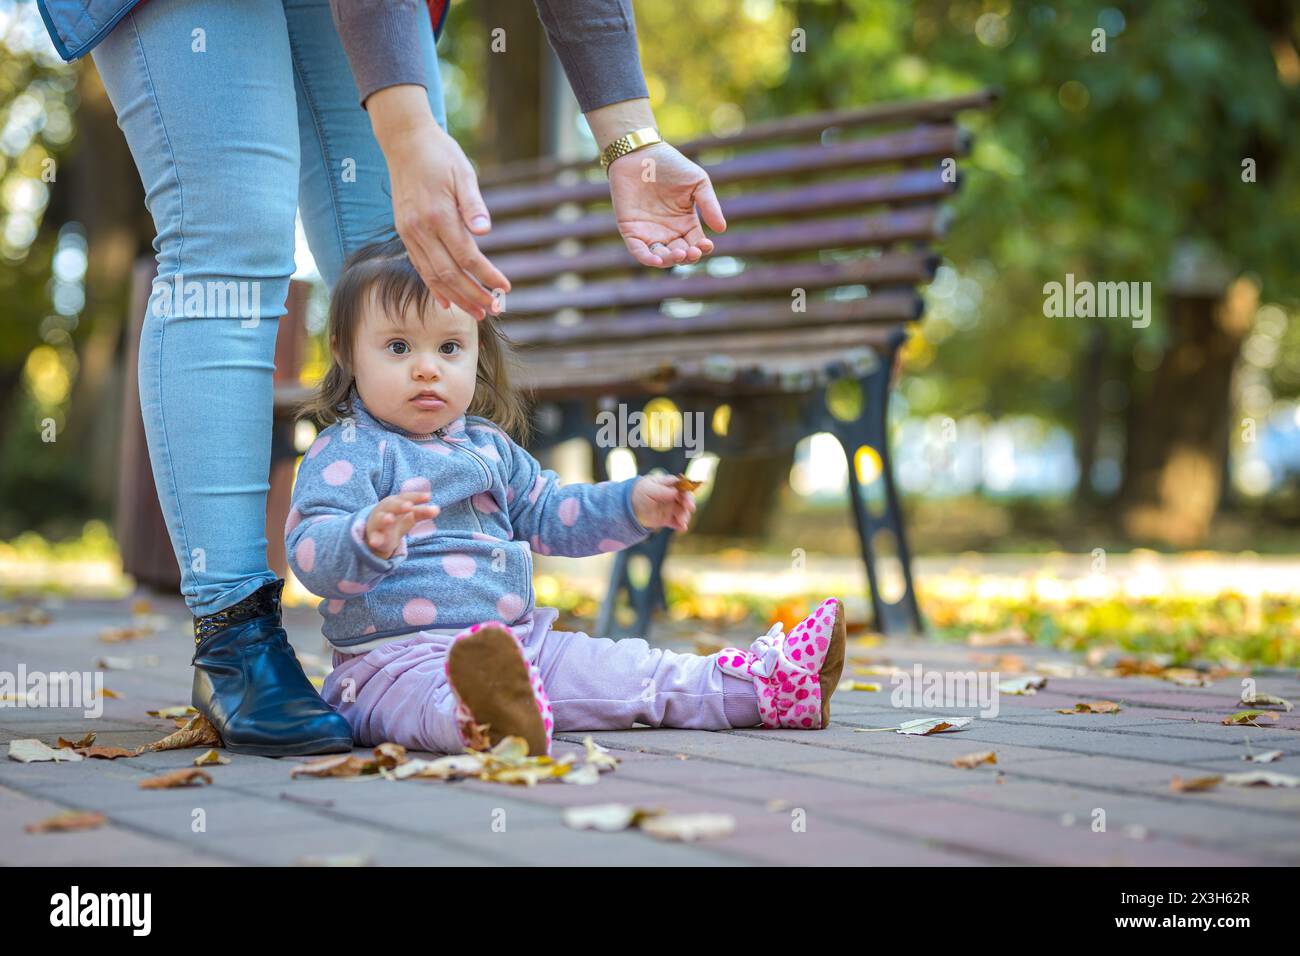 Baby Girl Setting down in the park and lifting your hands to be lifted Stock Photo